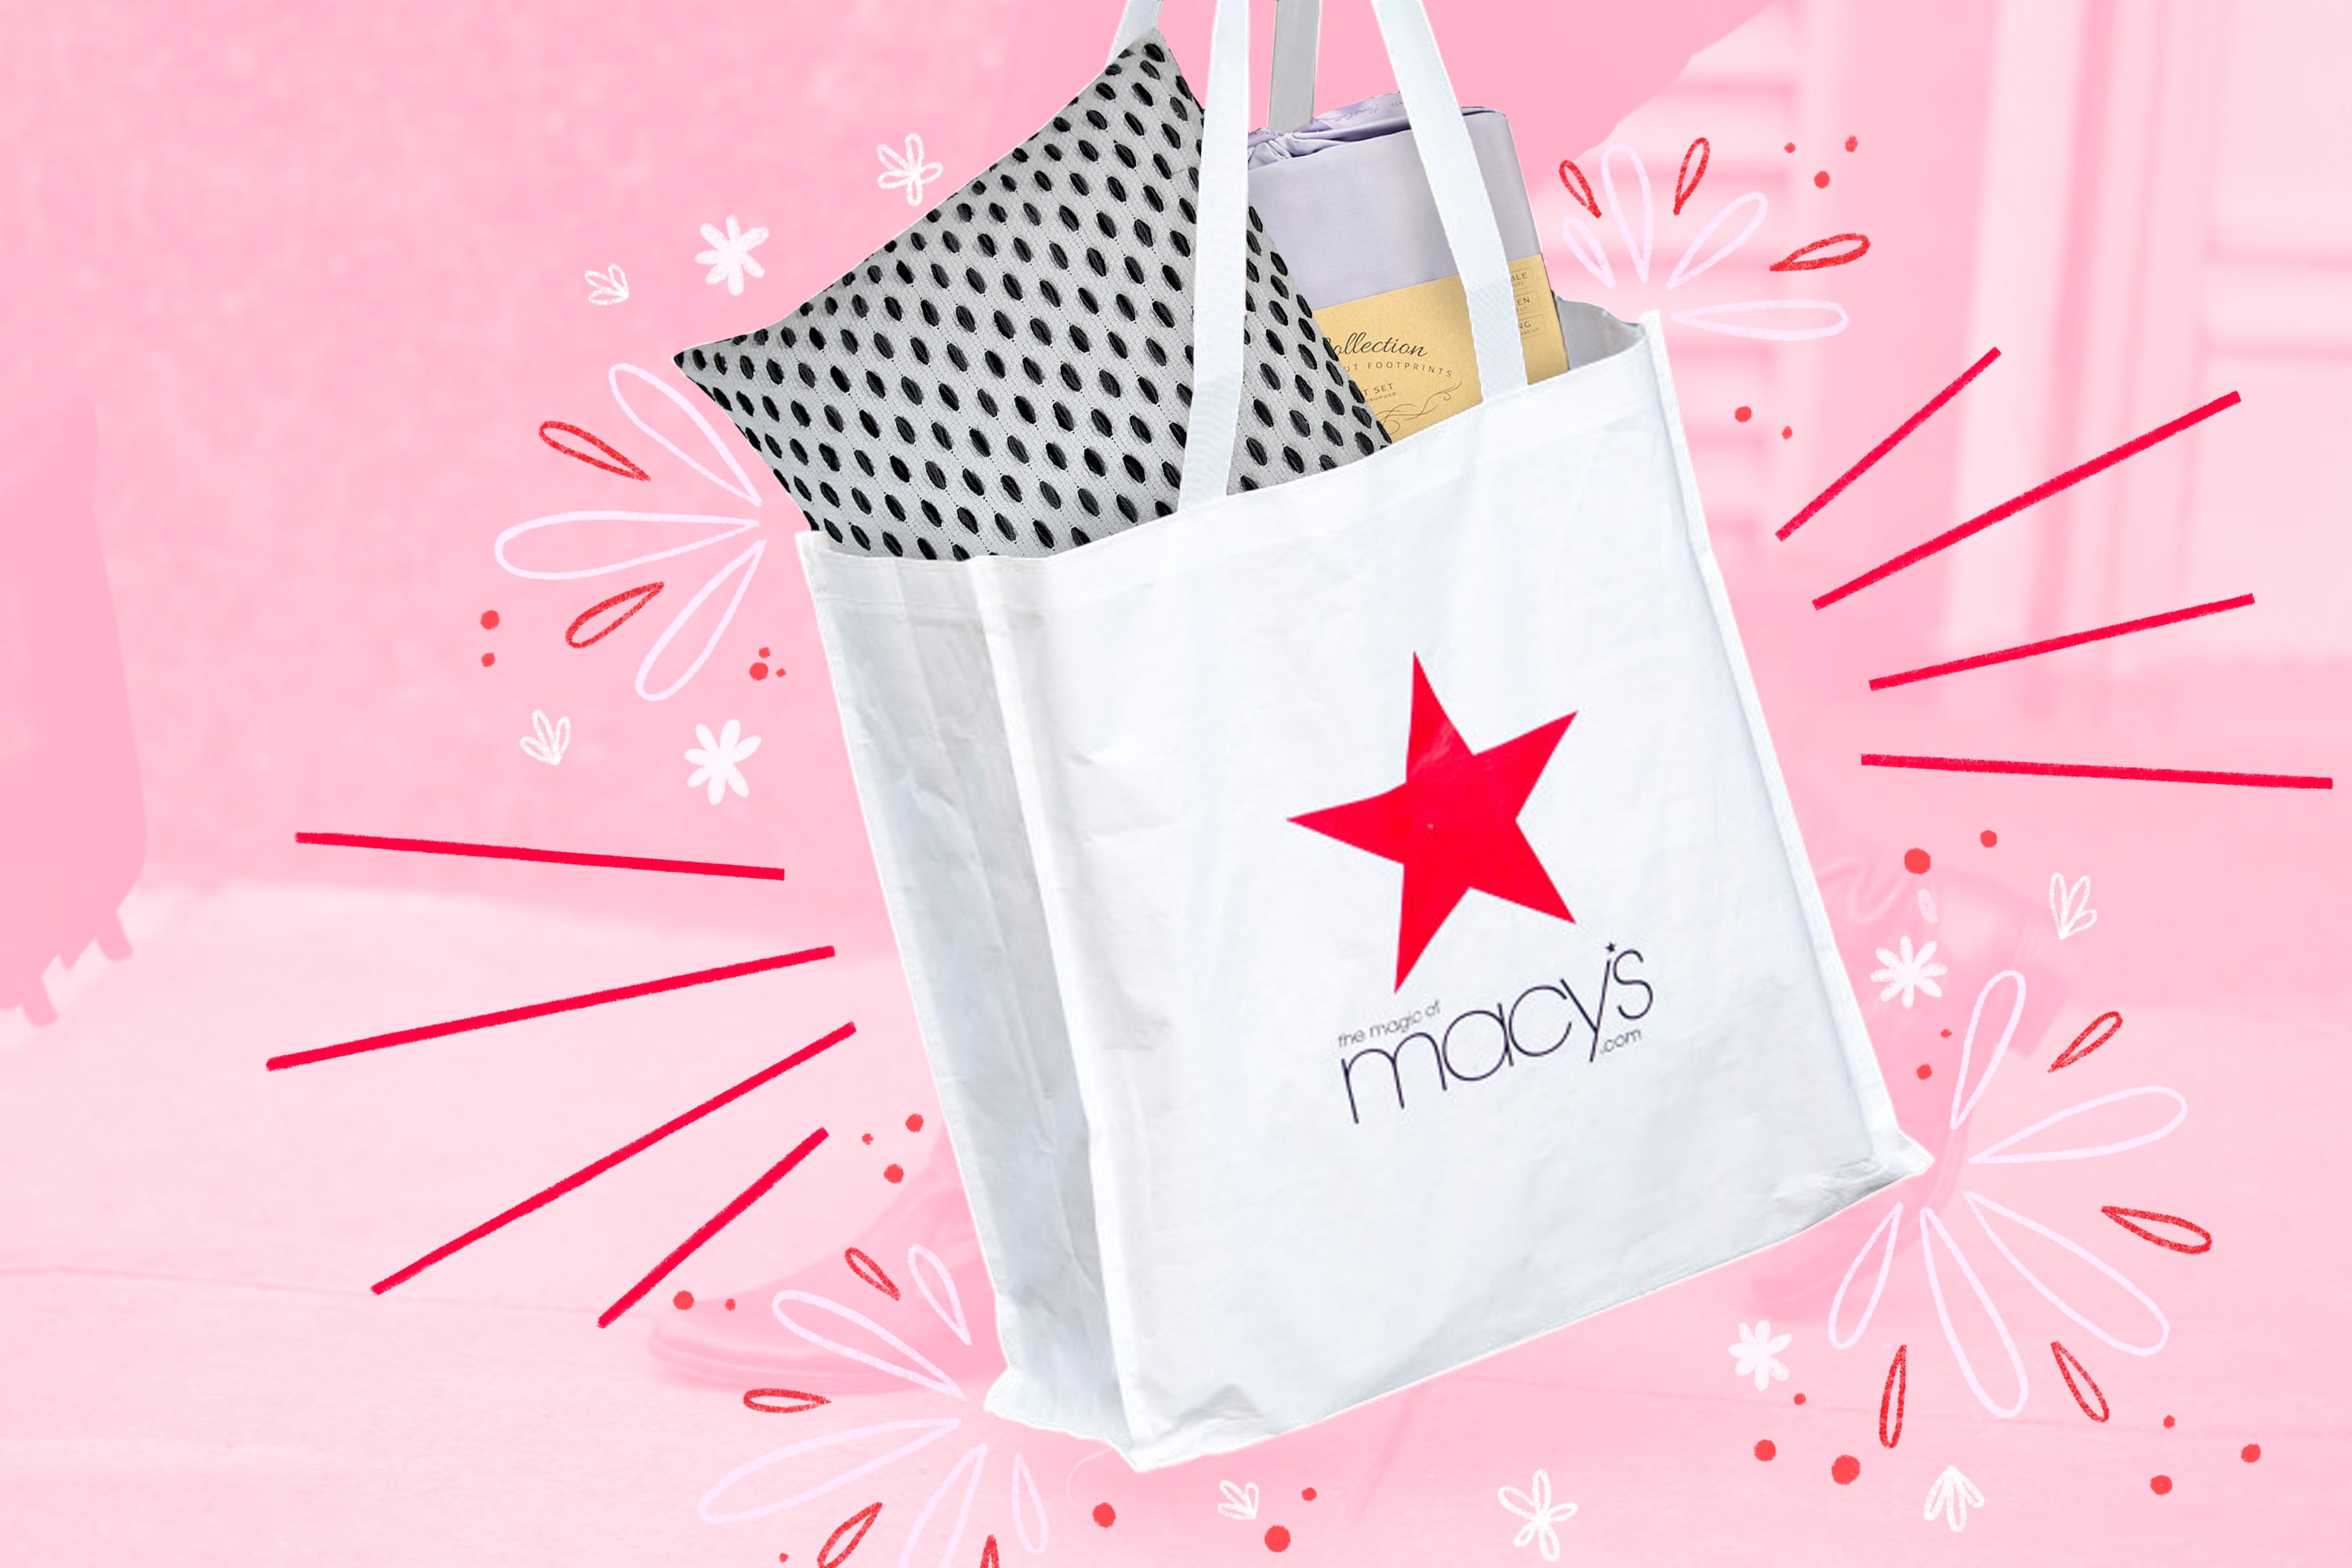 Macy's handbags sale: Shop designer purses and wallets at up to 60